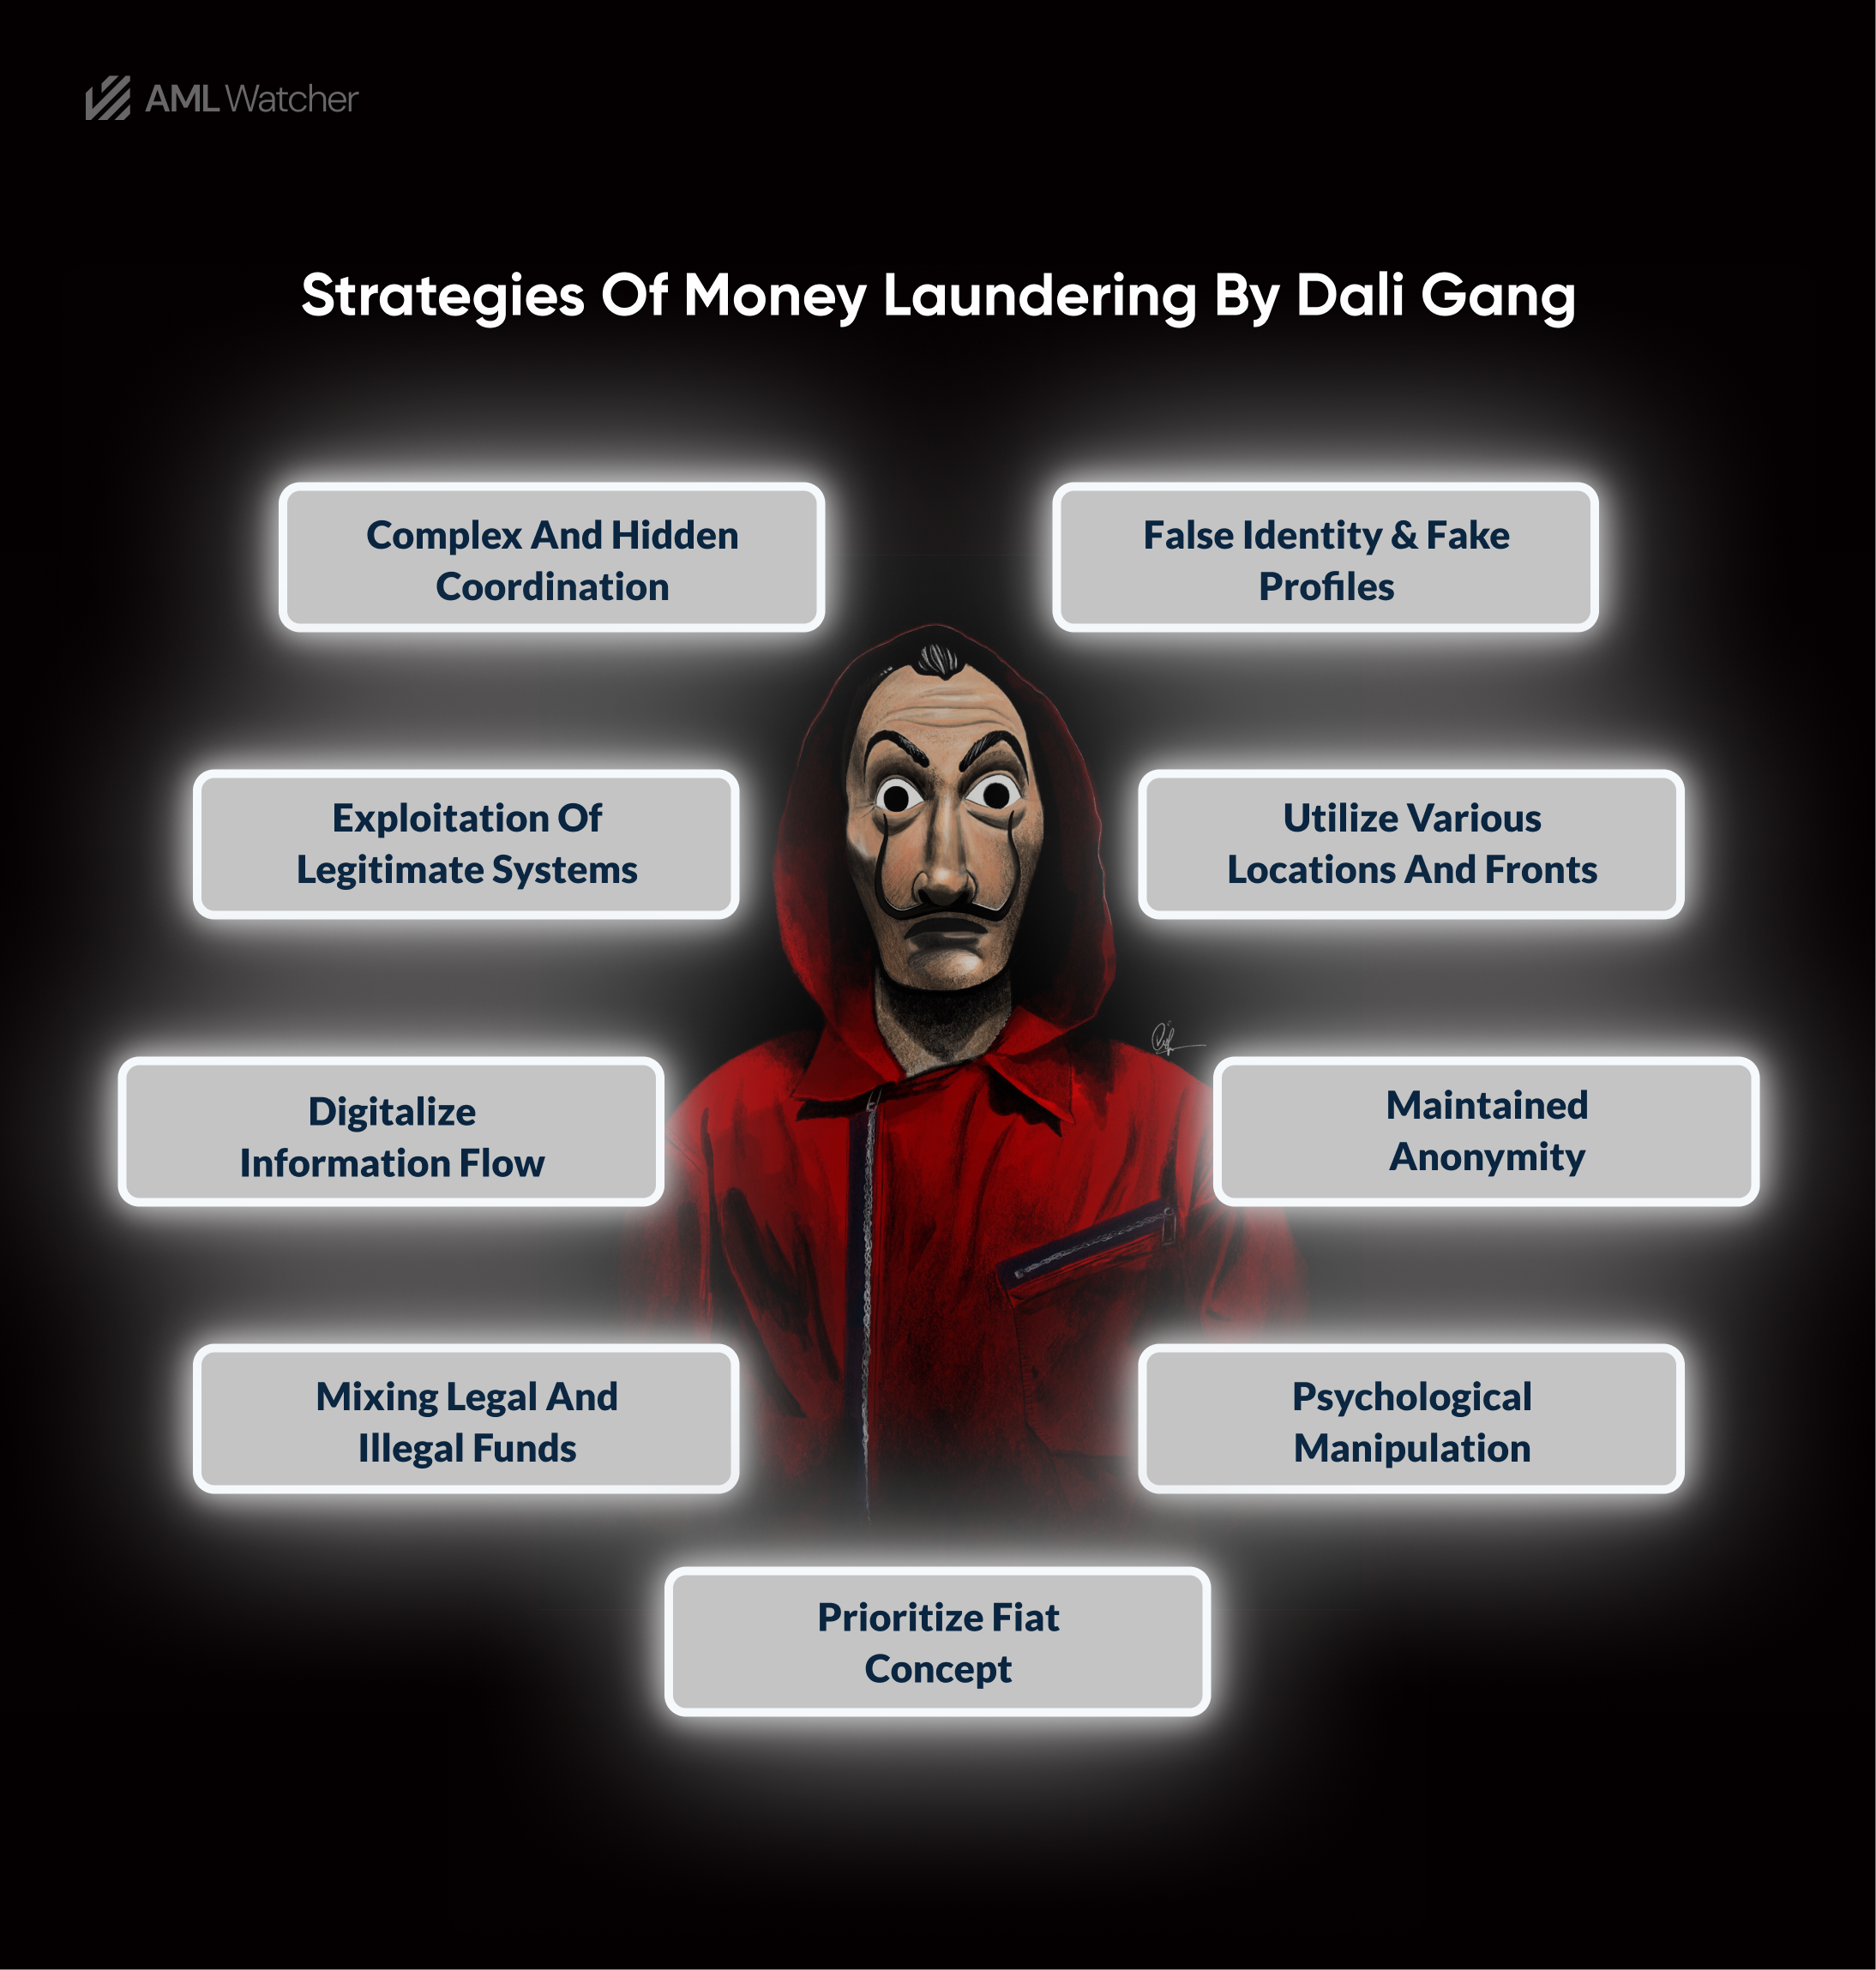 This image shows the major money laundering strategies used by money heist robber teams.